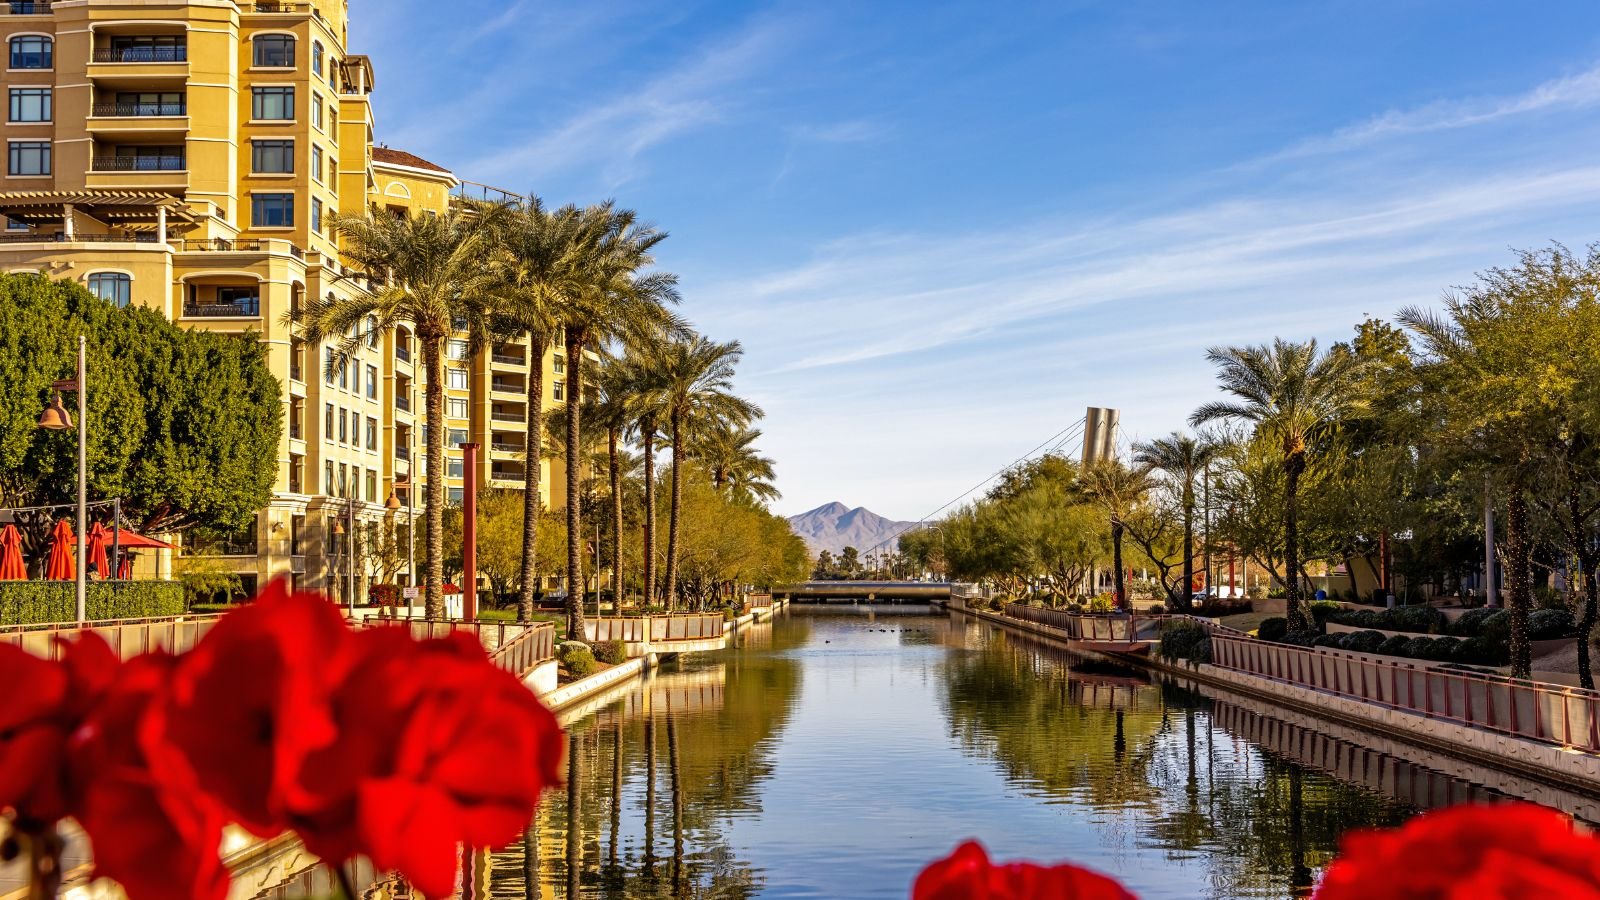 <p><a href="https://www.pods.com/blog/moving-scottsdale-az" rel="noopener">Scottsdale has 300 days of sunshine</a>. It dazzles seniors with its beautiful Sonoran Desert setting, luxury resorts, spas, galleries, and restaurants. The McDowell Mountains provide a scenic backdrop for hiking. You can relax at an evening concert or event.</p>